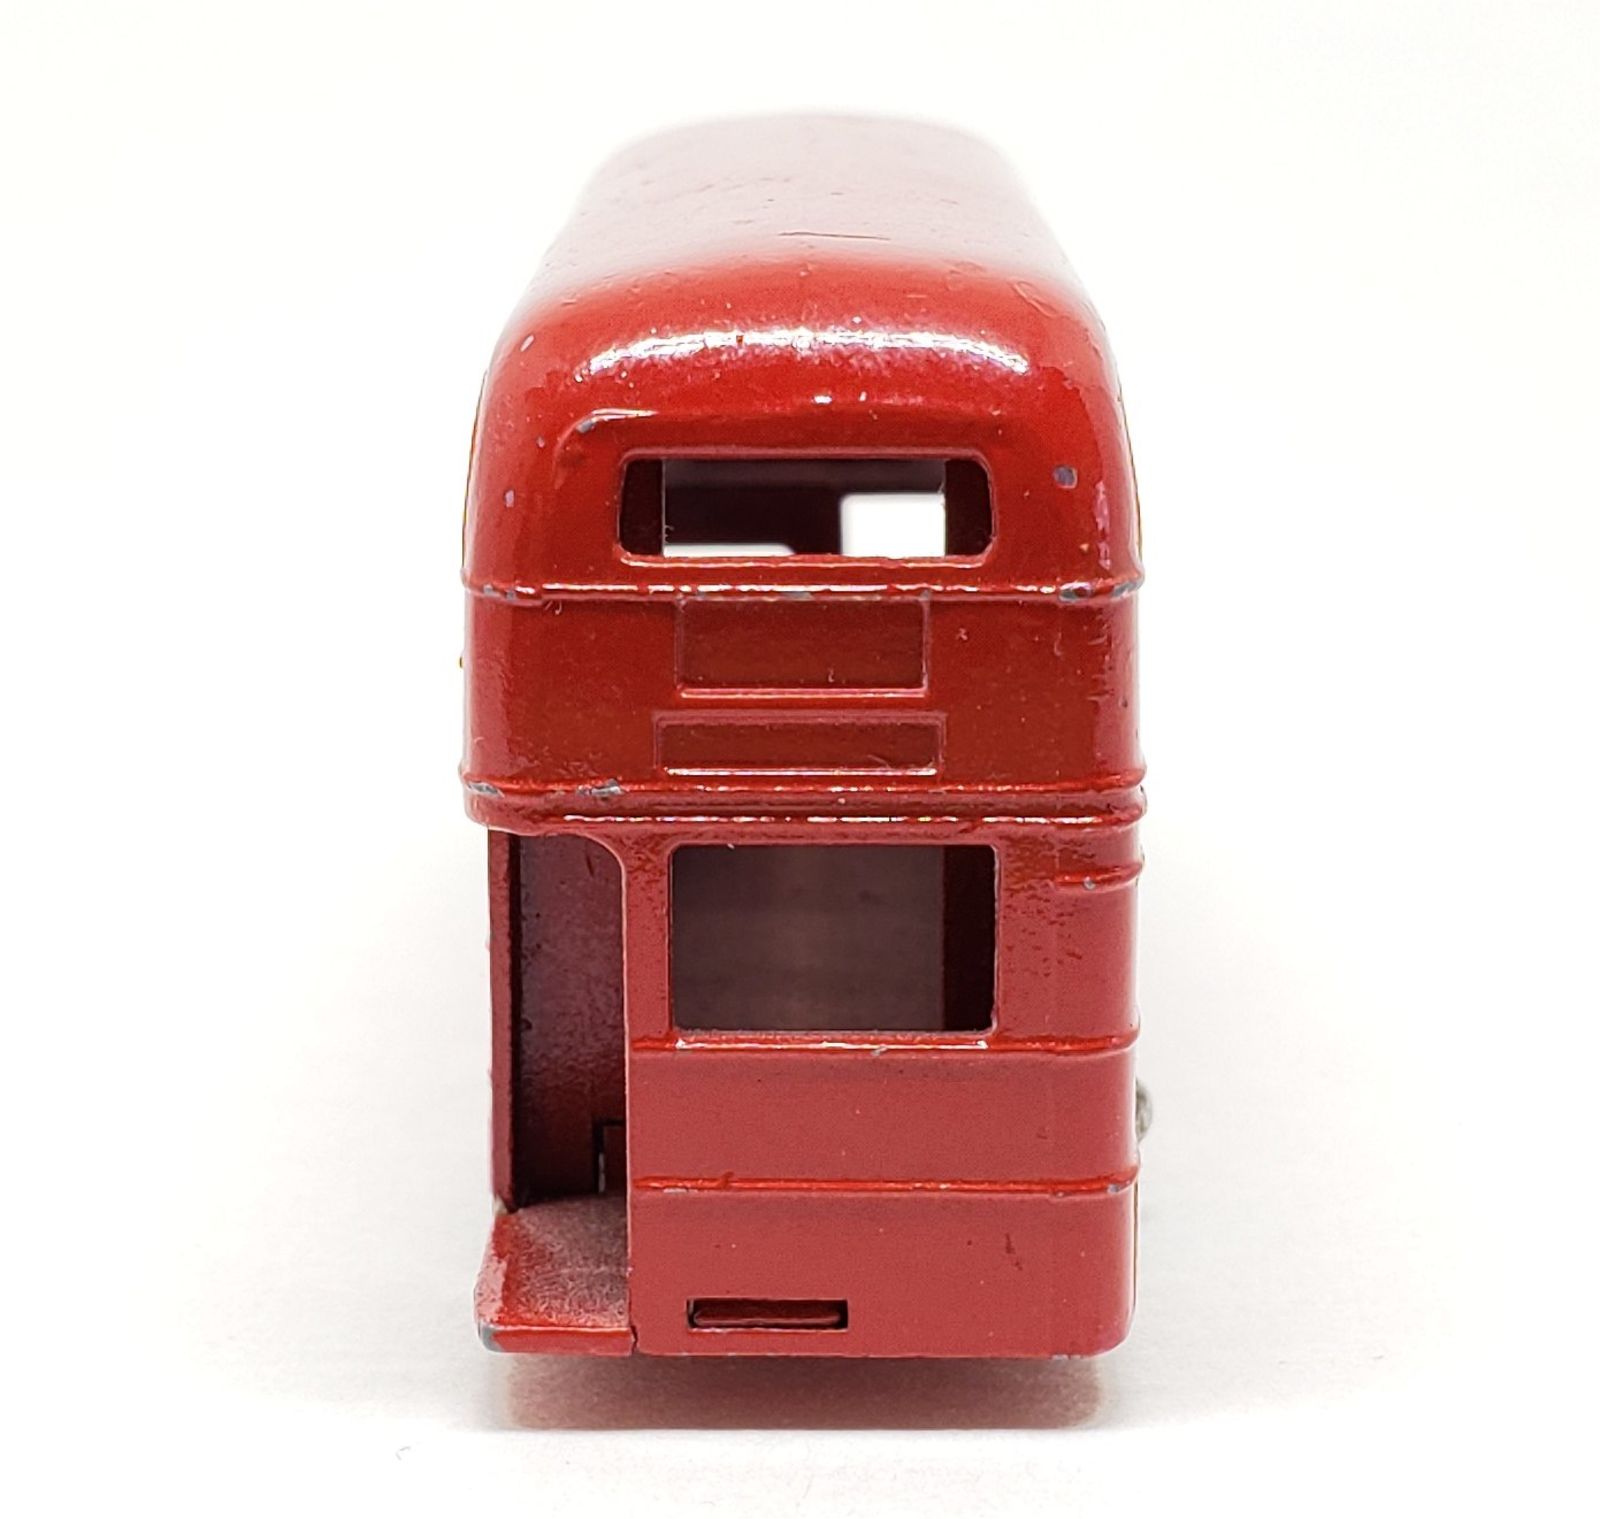 Illustration for article titled [REVIEW] Lesney Matchbox Routemaster Bus